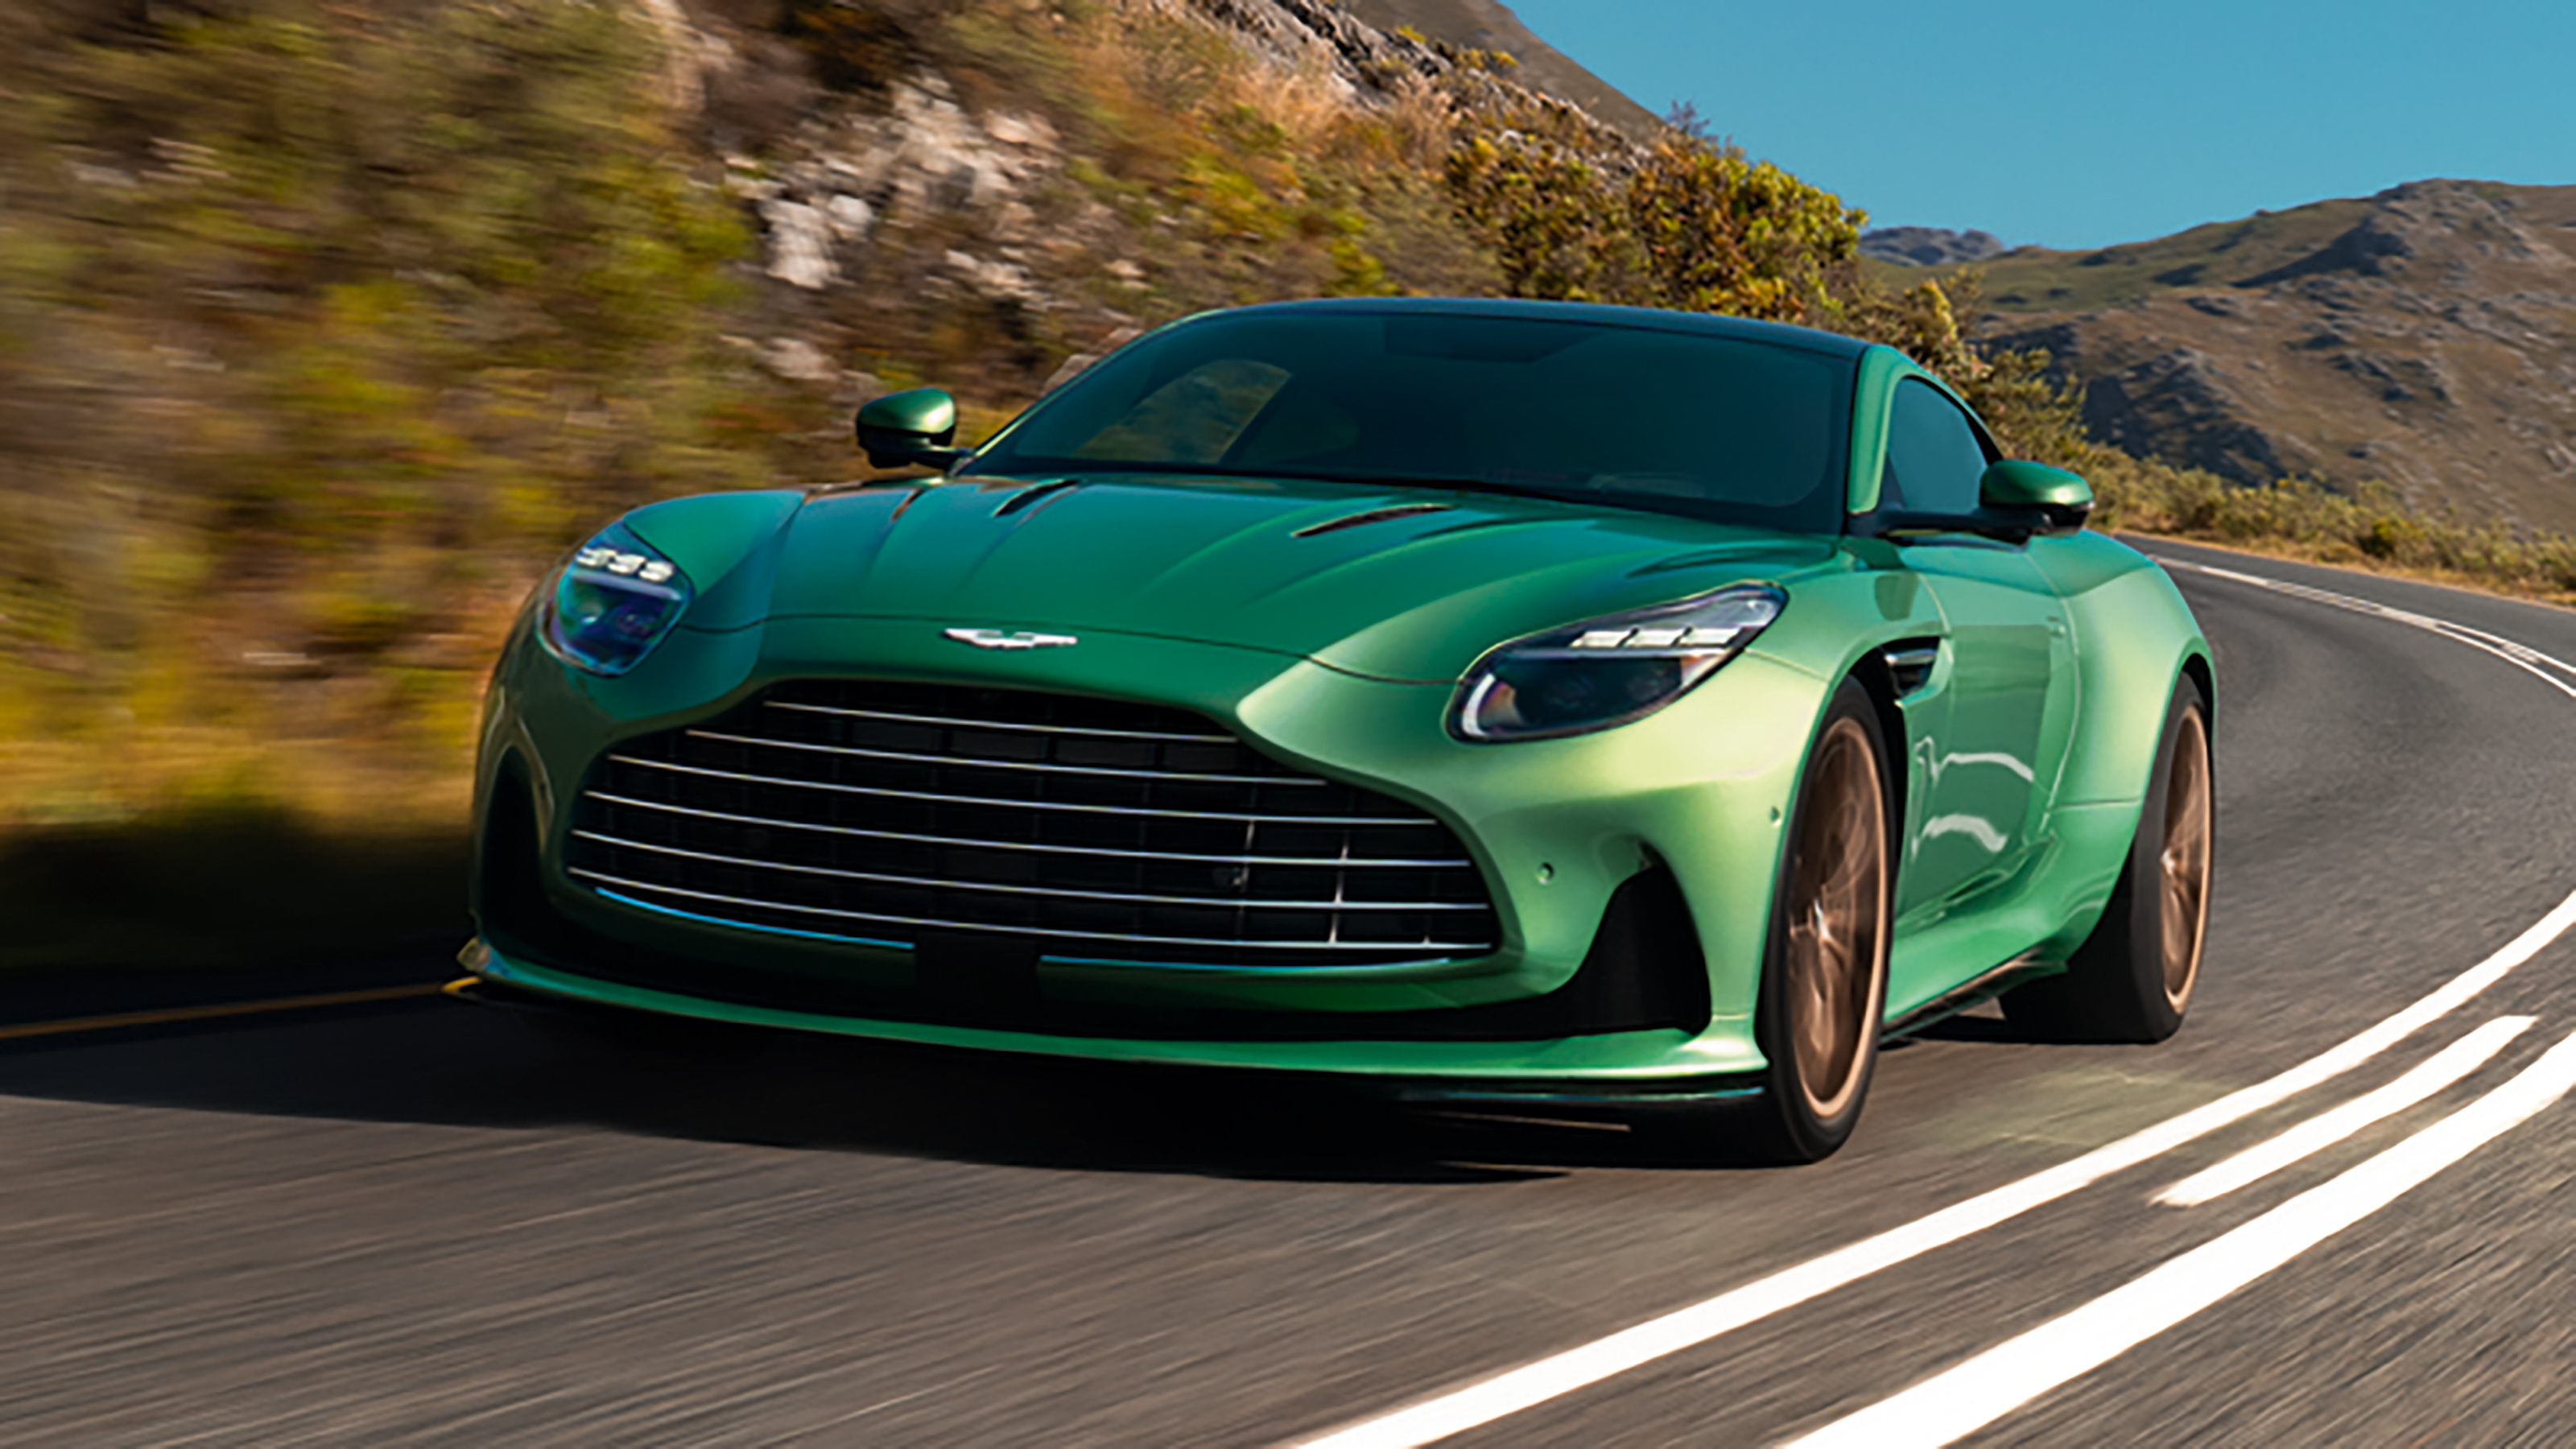 2023 Aston Martin DB12 arrives with new design, interior and